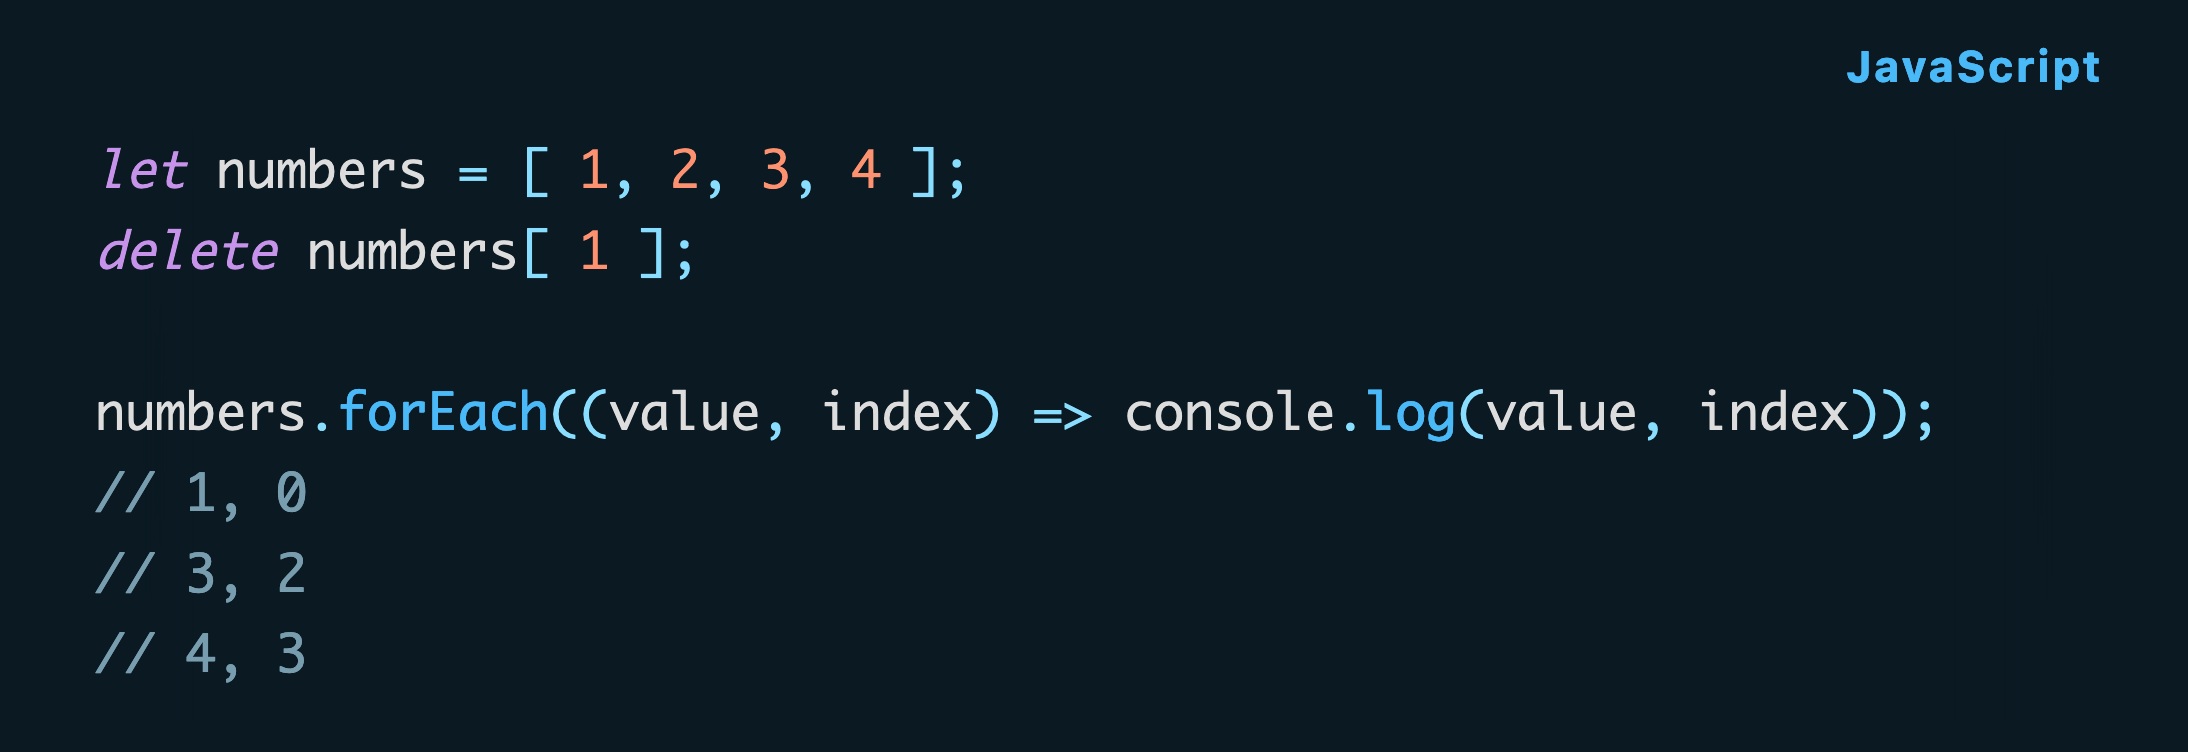 JavaScript code: let numbers = [ 1, 2, 3, 4 ]; delete numbers[ 1 ];  numbers.forEach((value, index) => console.log(value, index)); // 1, 0 // 3, 2 // 4, 3